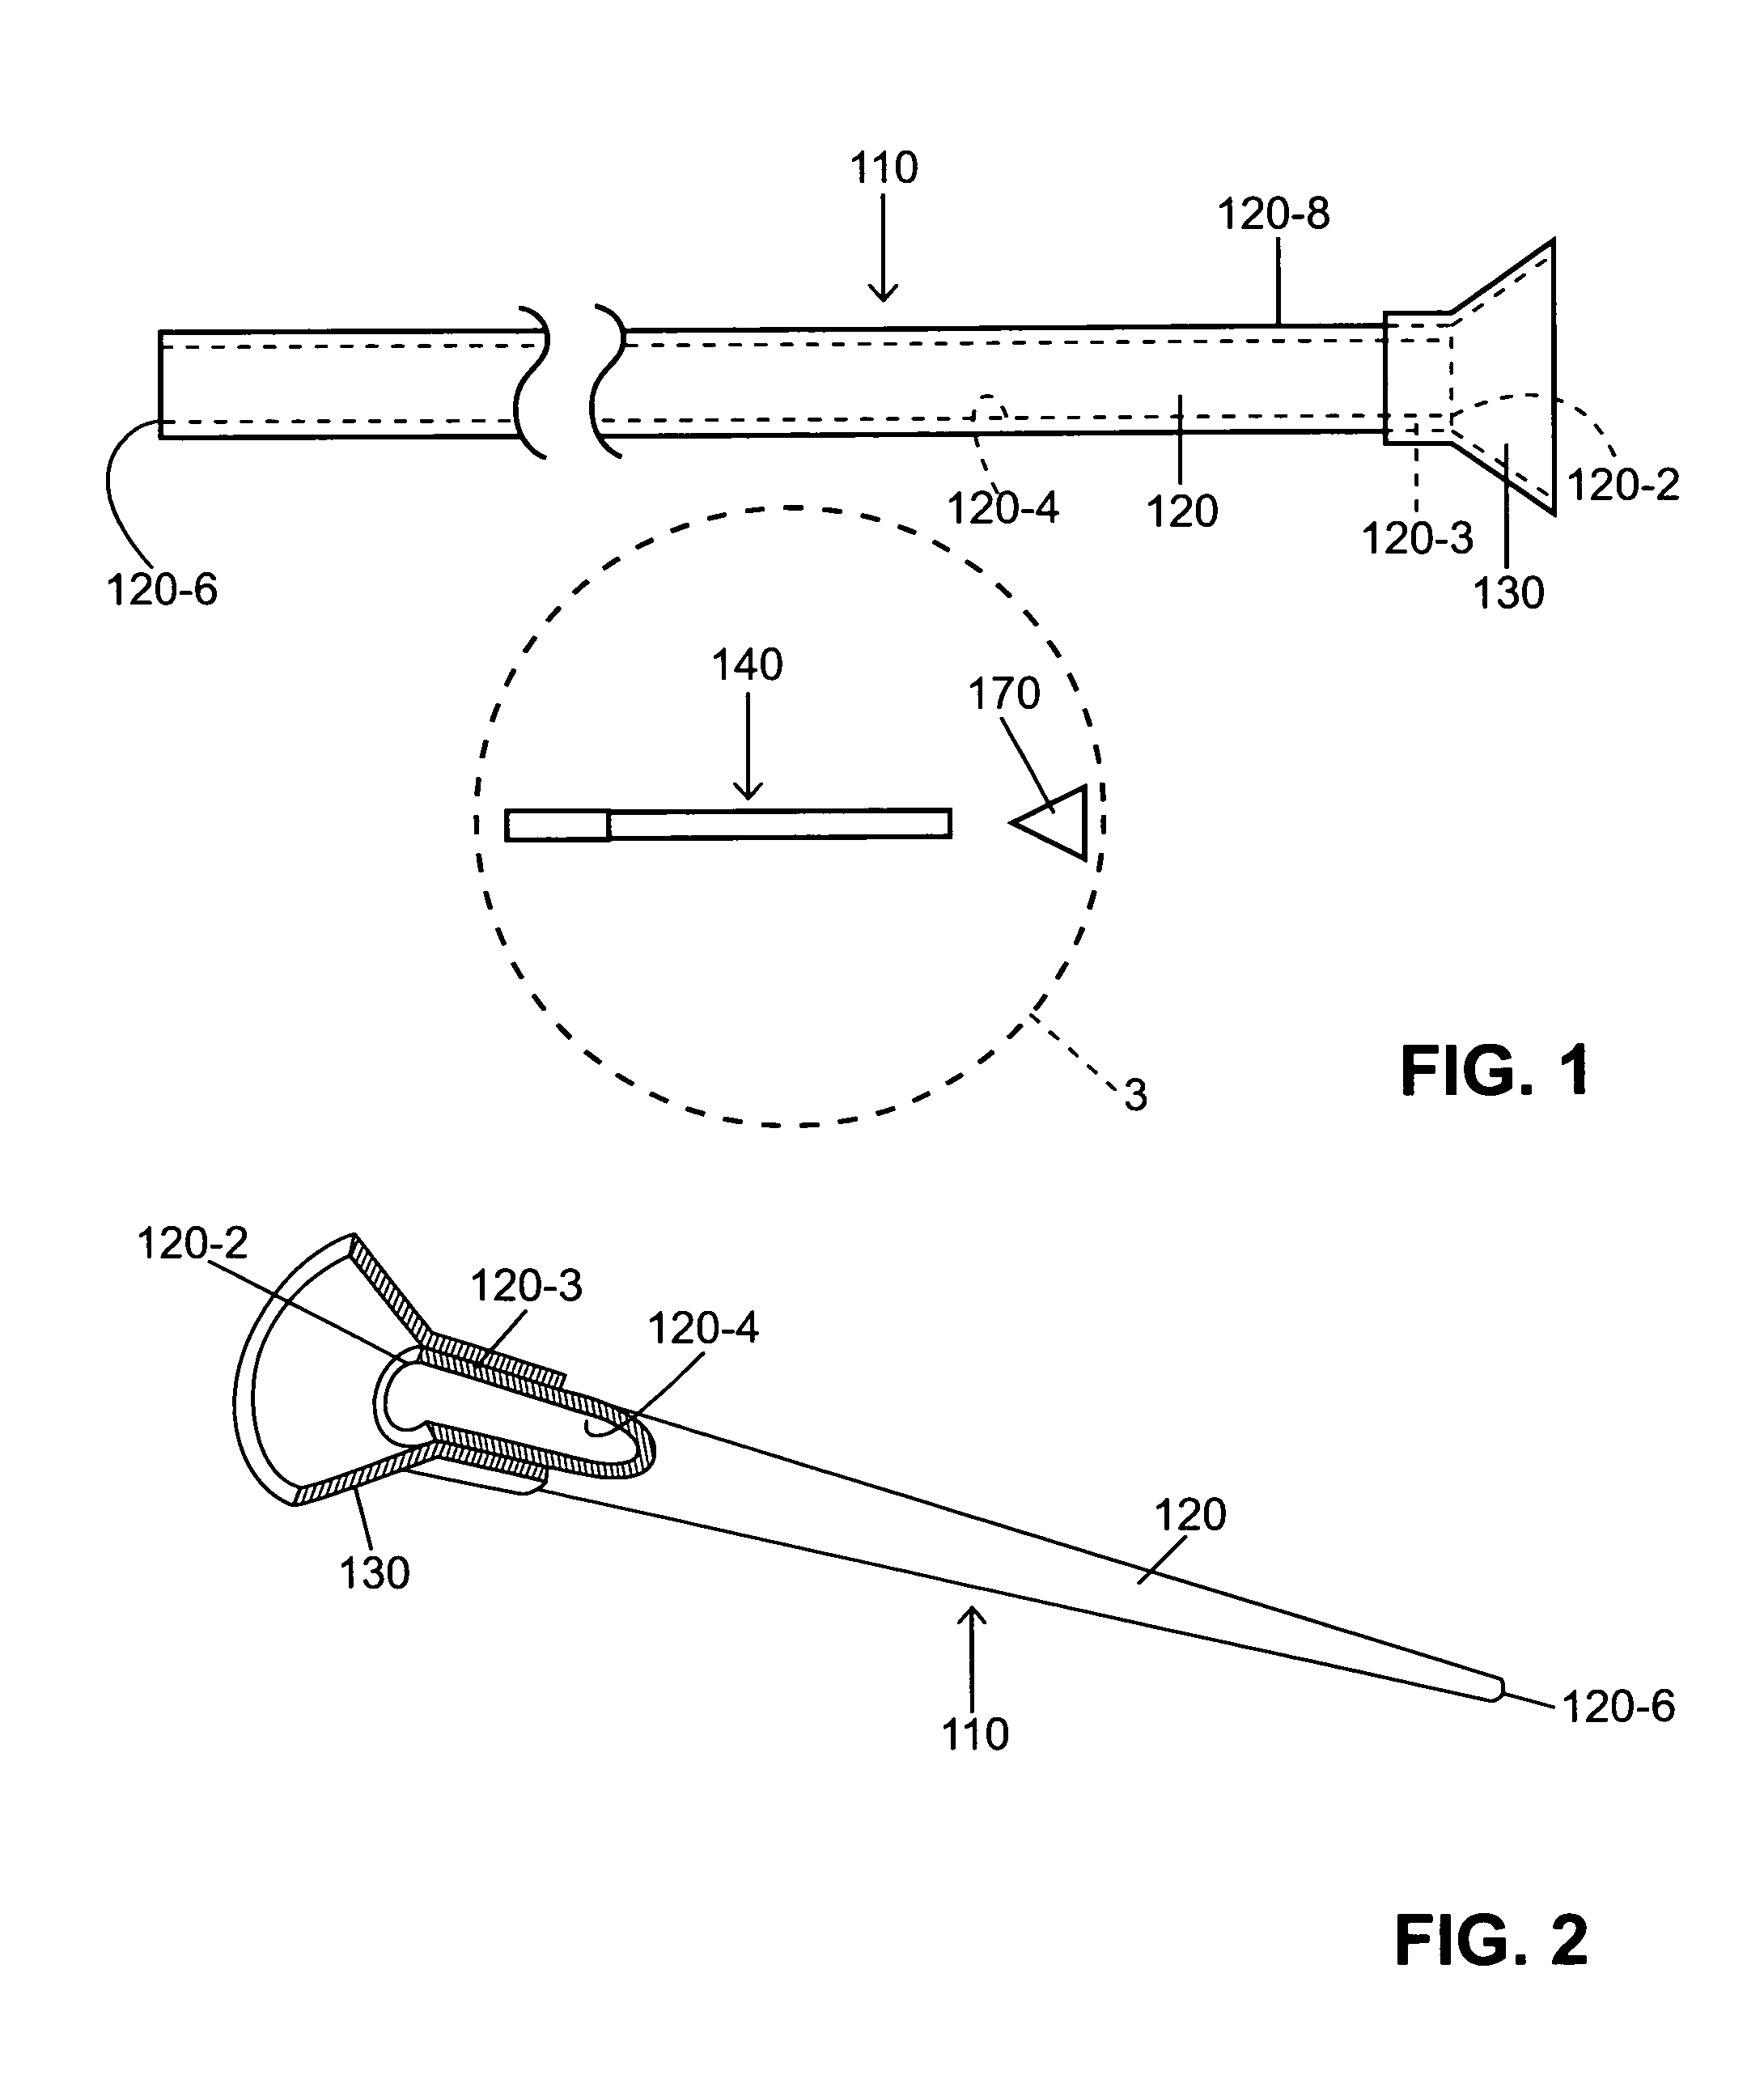 Apparatus for launching subcaliber projectiles at propellant operating pressures including the range of operating pressures that may be supplied by human breath